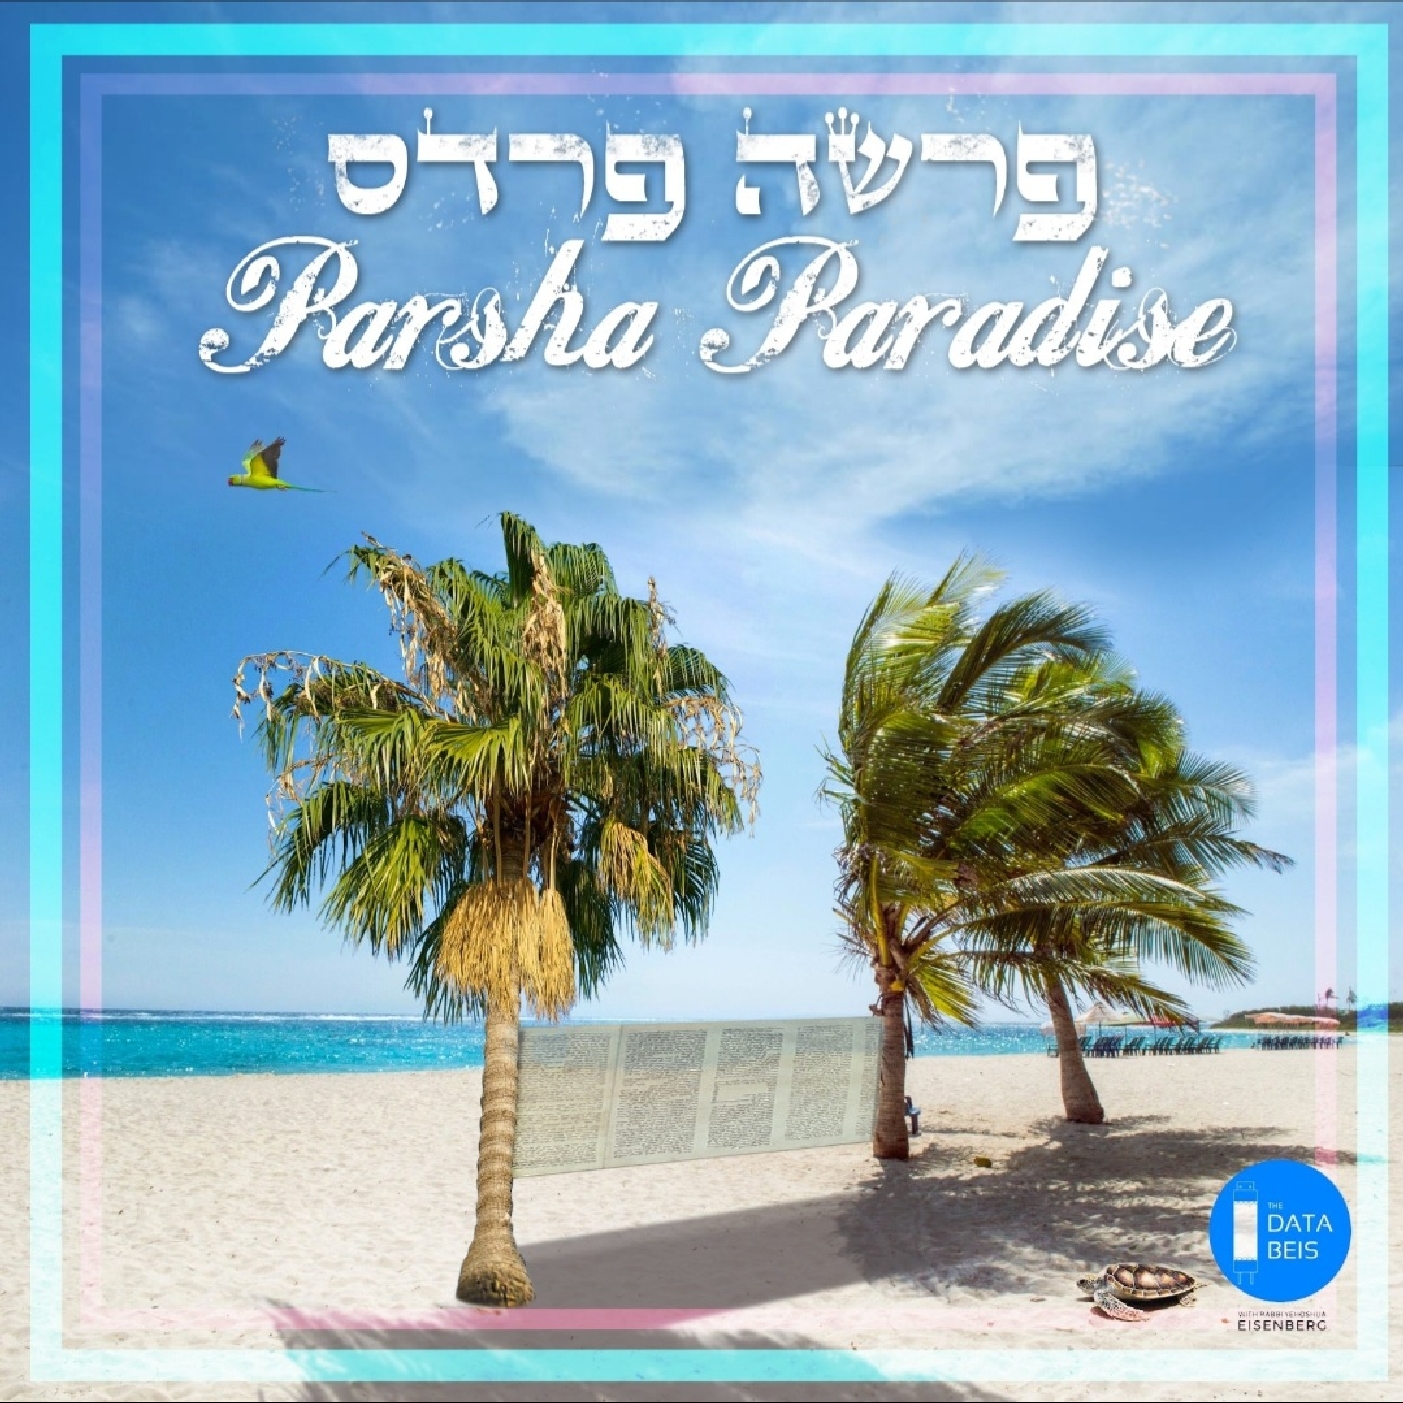 Parsha Paradise/פרשה פרדס - Nasso: The Leining We Sort of Know By Heart 🥣 🍚 🥄🐂🐏🐑🐐🐂🐂🐏🐏🐏🐏🐏🐐🐐🐐🐐🐐🐑🐑🐑🐑🐑  